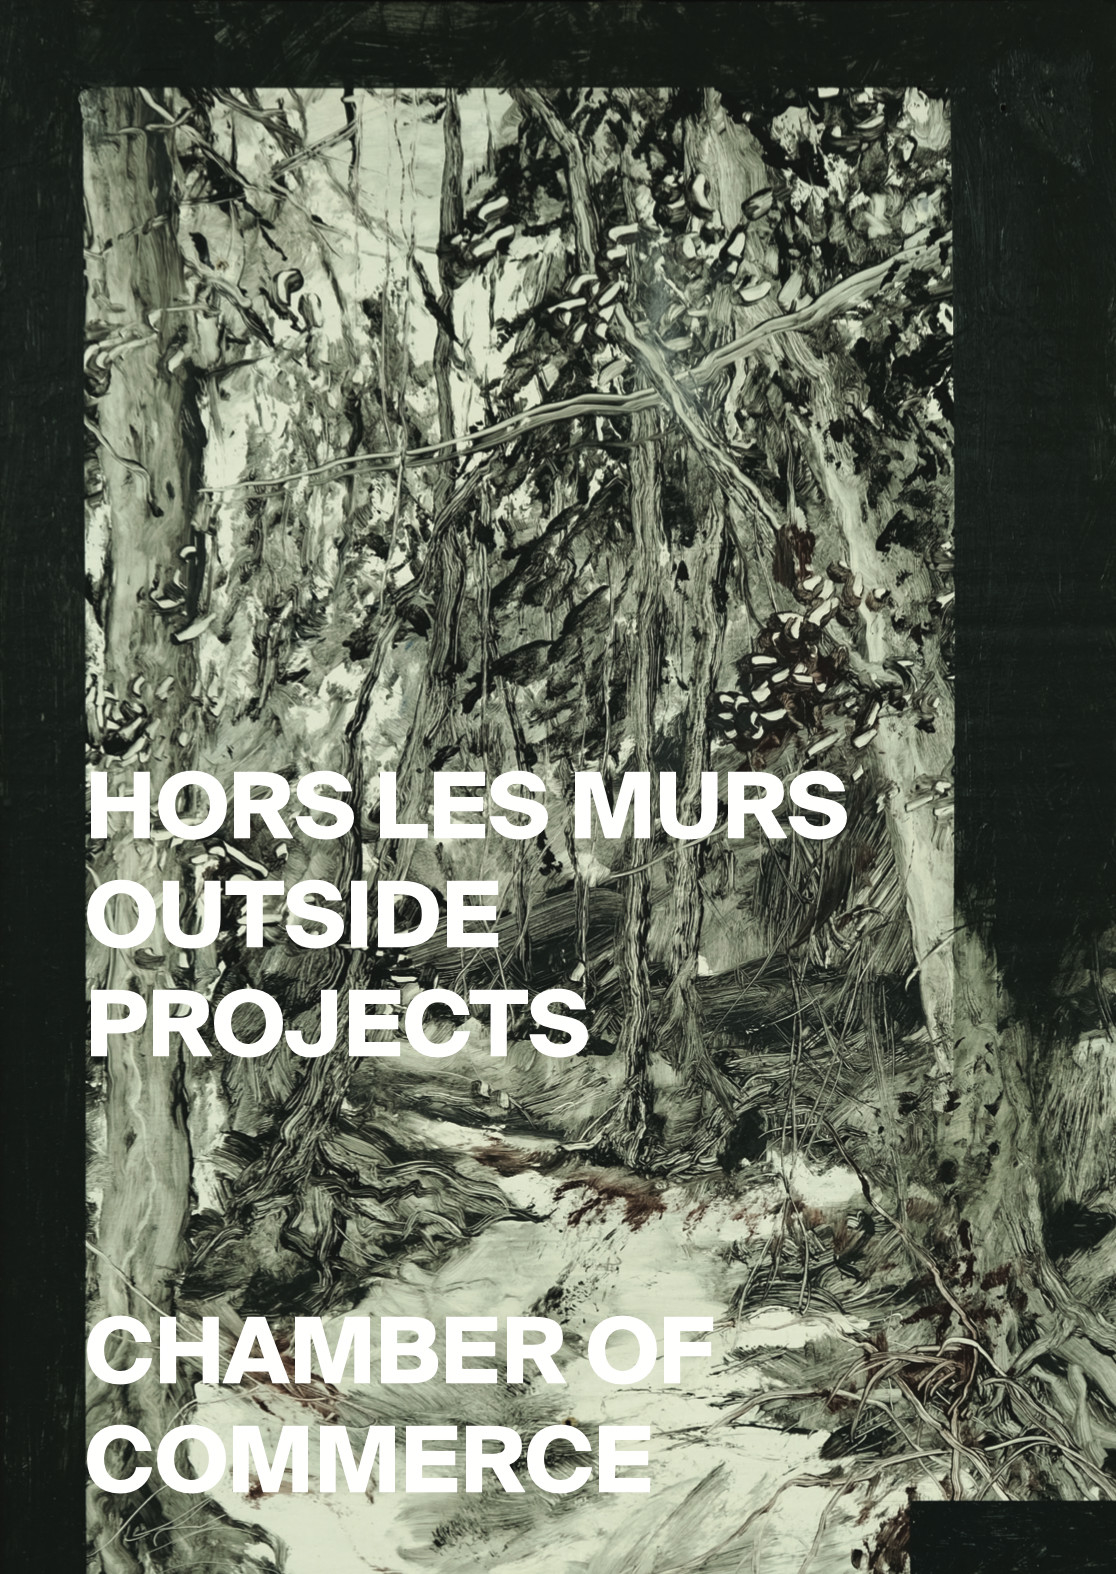 Exhibition Hors les murs | outside projects | Arny Schmit  Inside-Out  with Arny Schmit at Reuter Bausch Art Gallery